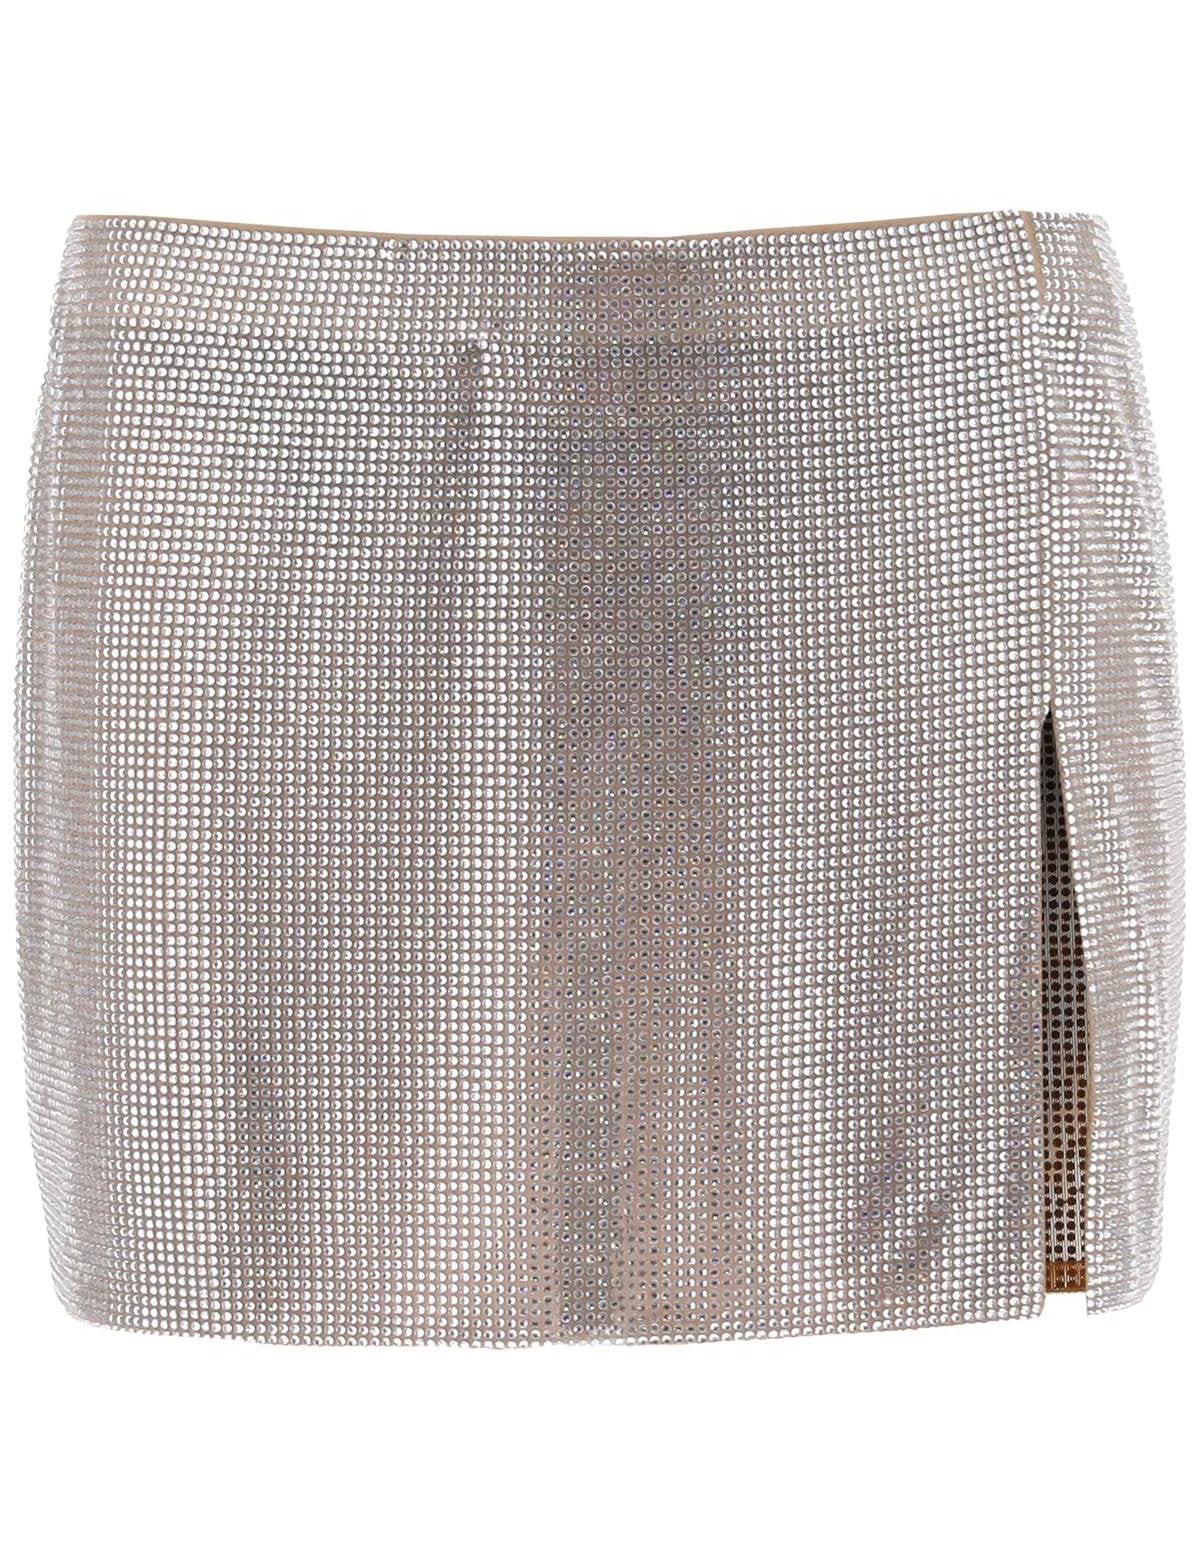 giuseppe-di-morabito-mini-skirt-in-mesh-with-crystals-all-over.jpg